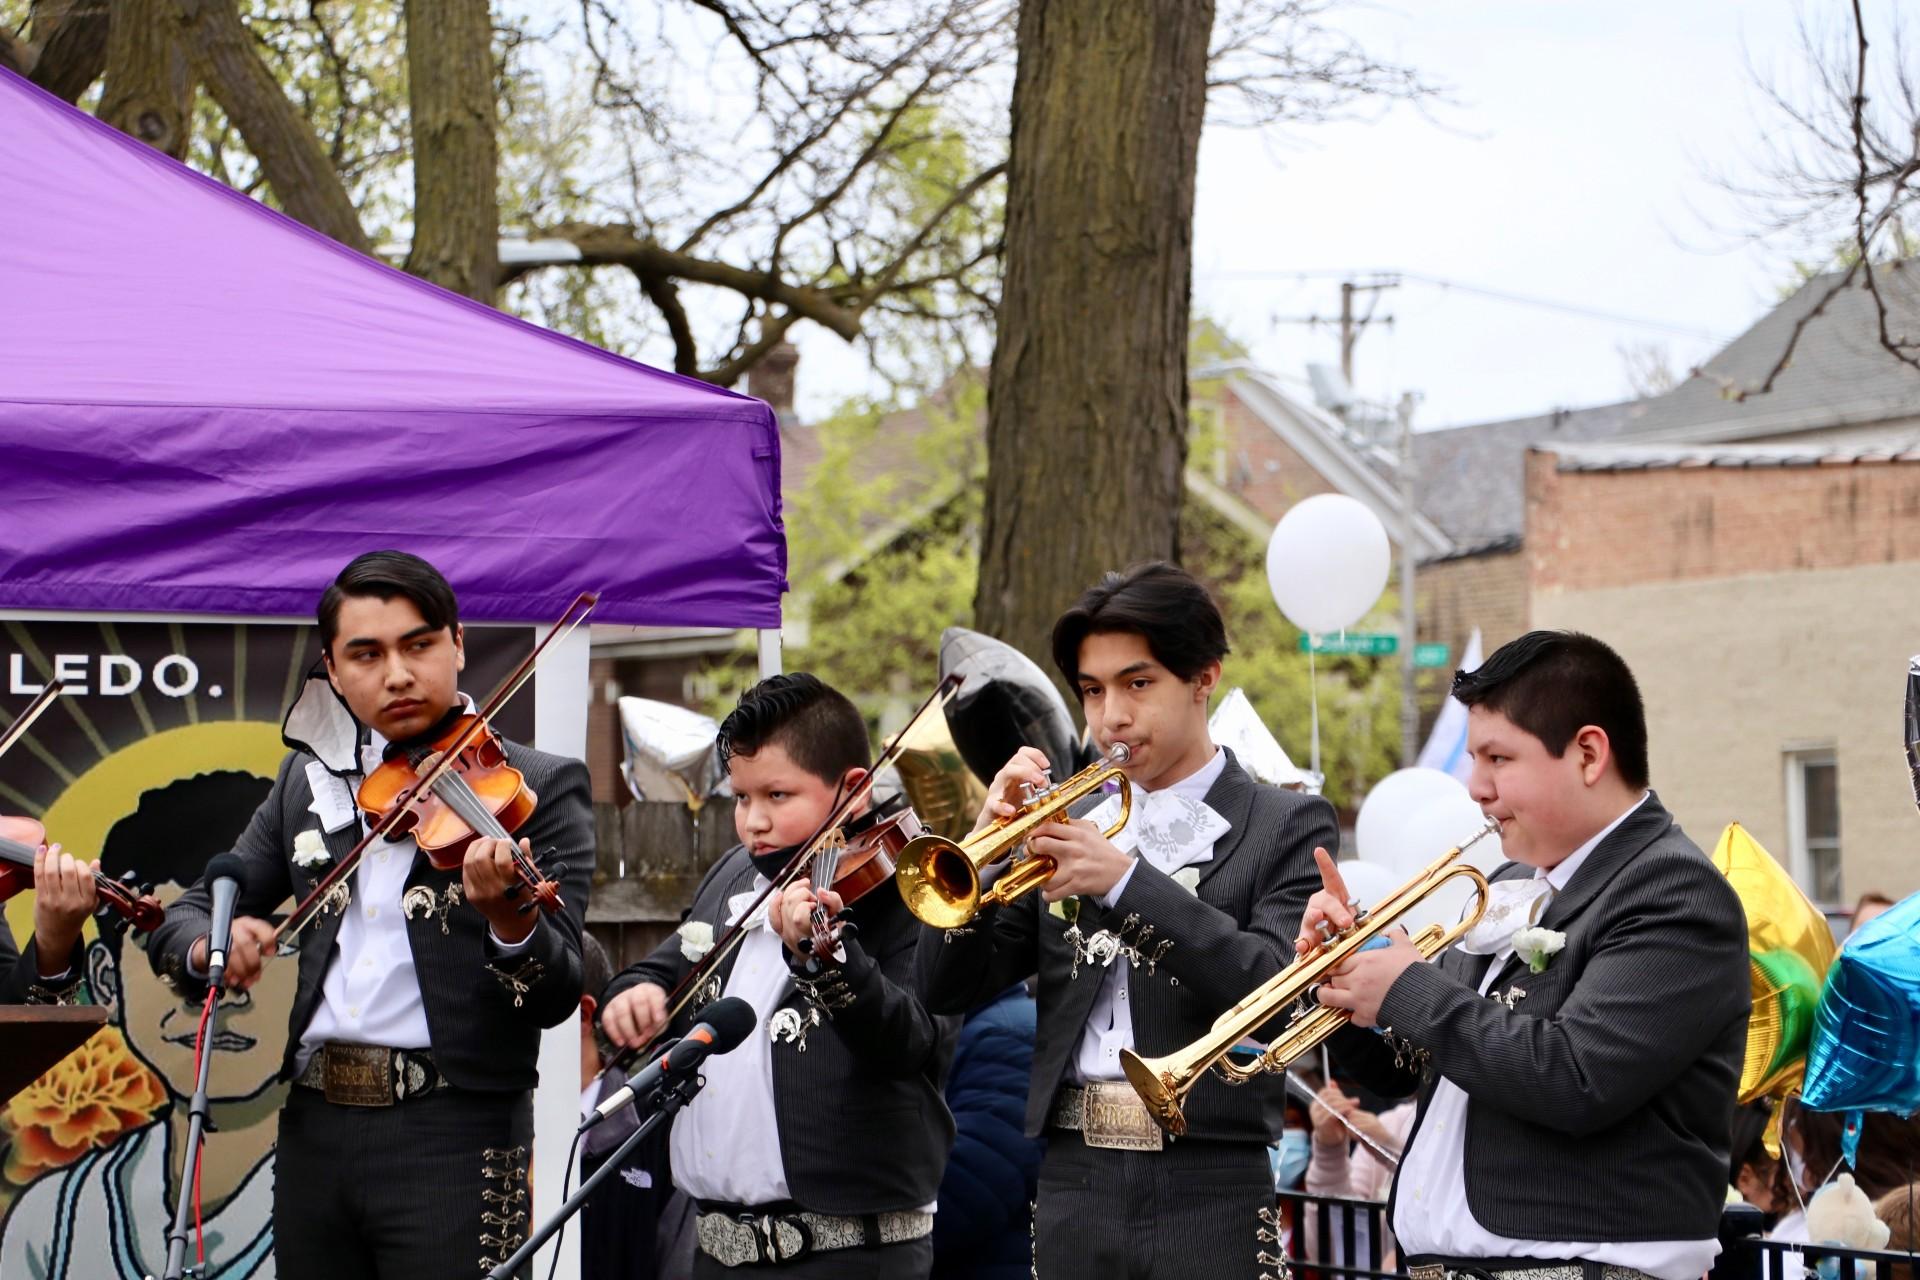 A mariachi band performs April 18, 2021 during a peace walk organized in Little Village, a predominantly Latino community on Chicago’s West Side. (Evan Garcia / WTTW News)